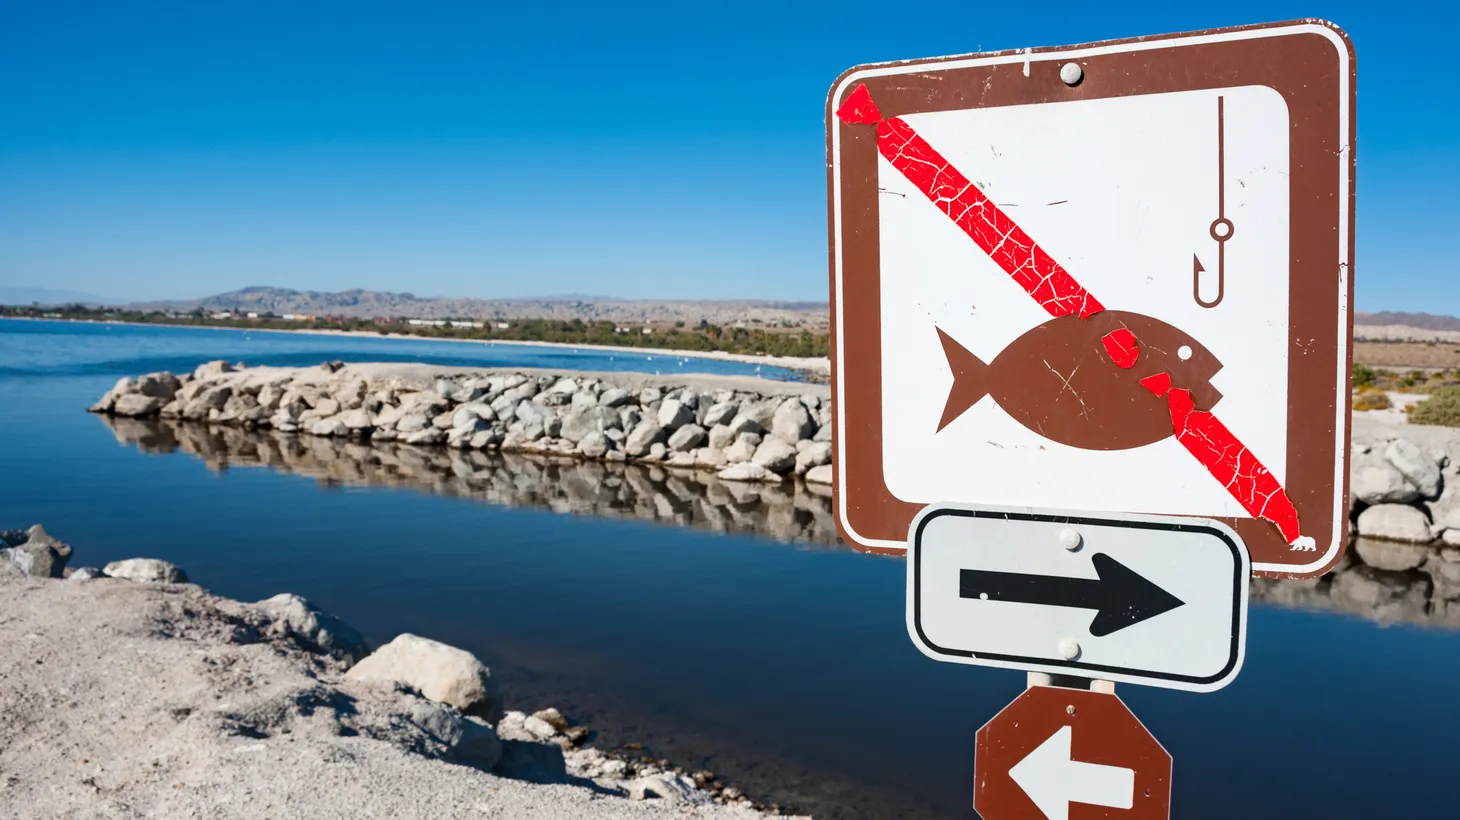 A “no fishing” sign appears on the banks of the Salton Sea in Southern California.